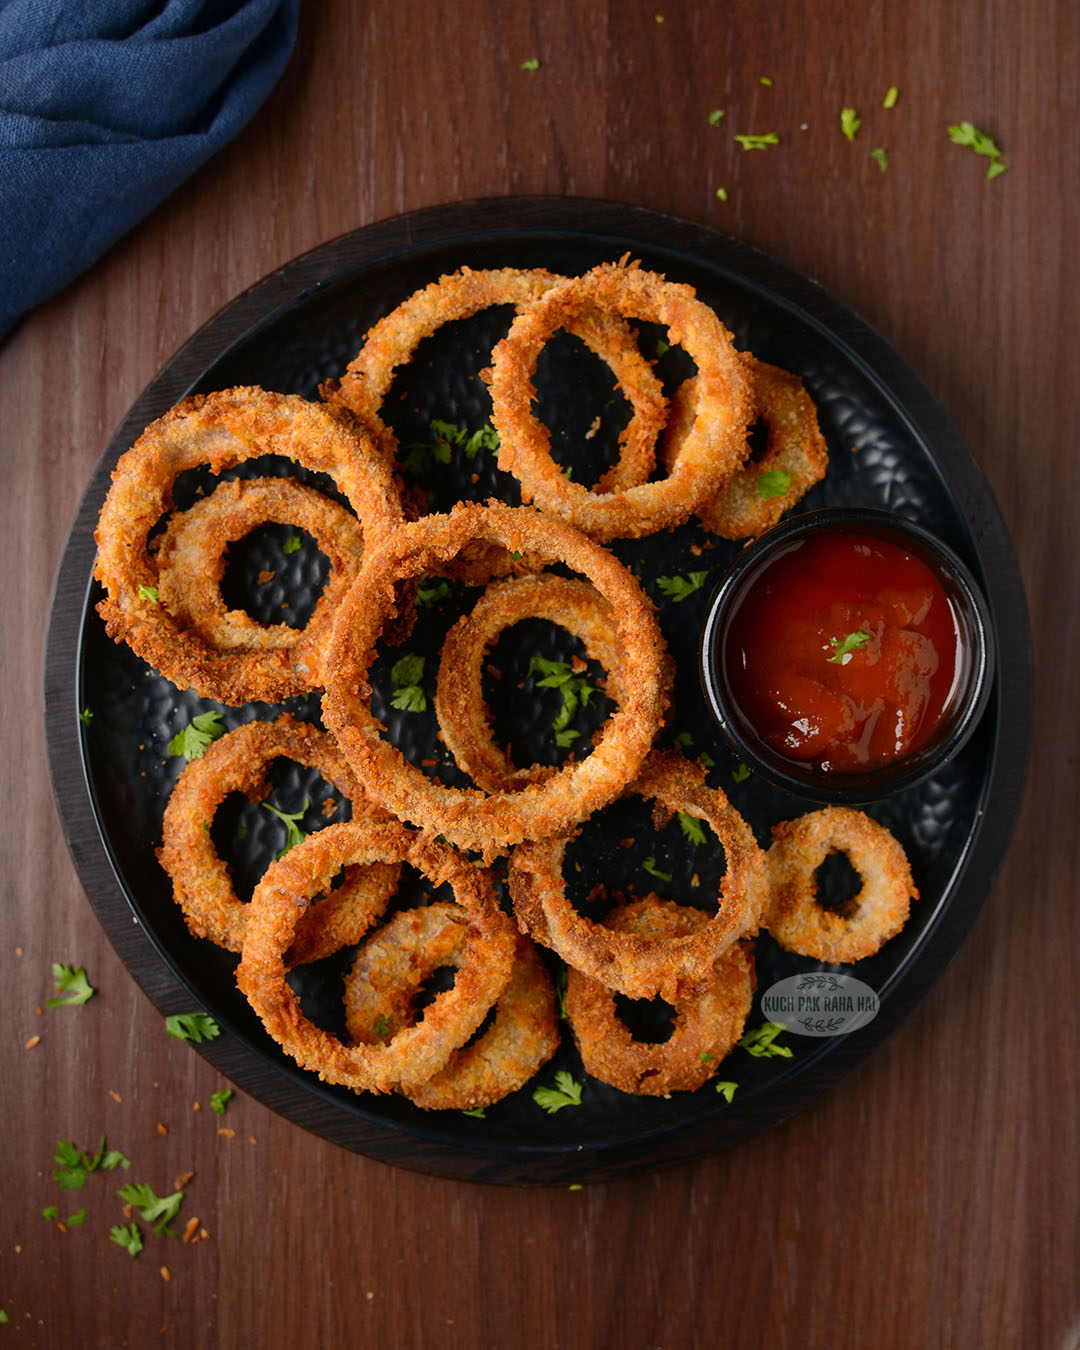 Air fried onion rings served with ketchup.